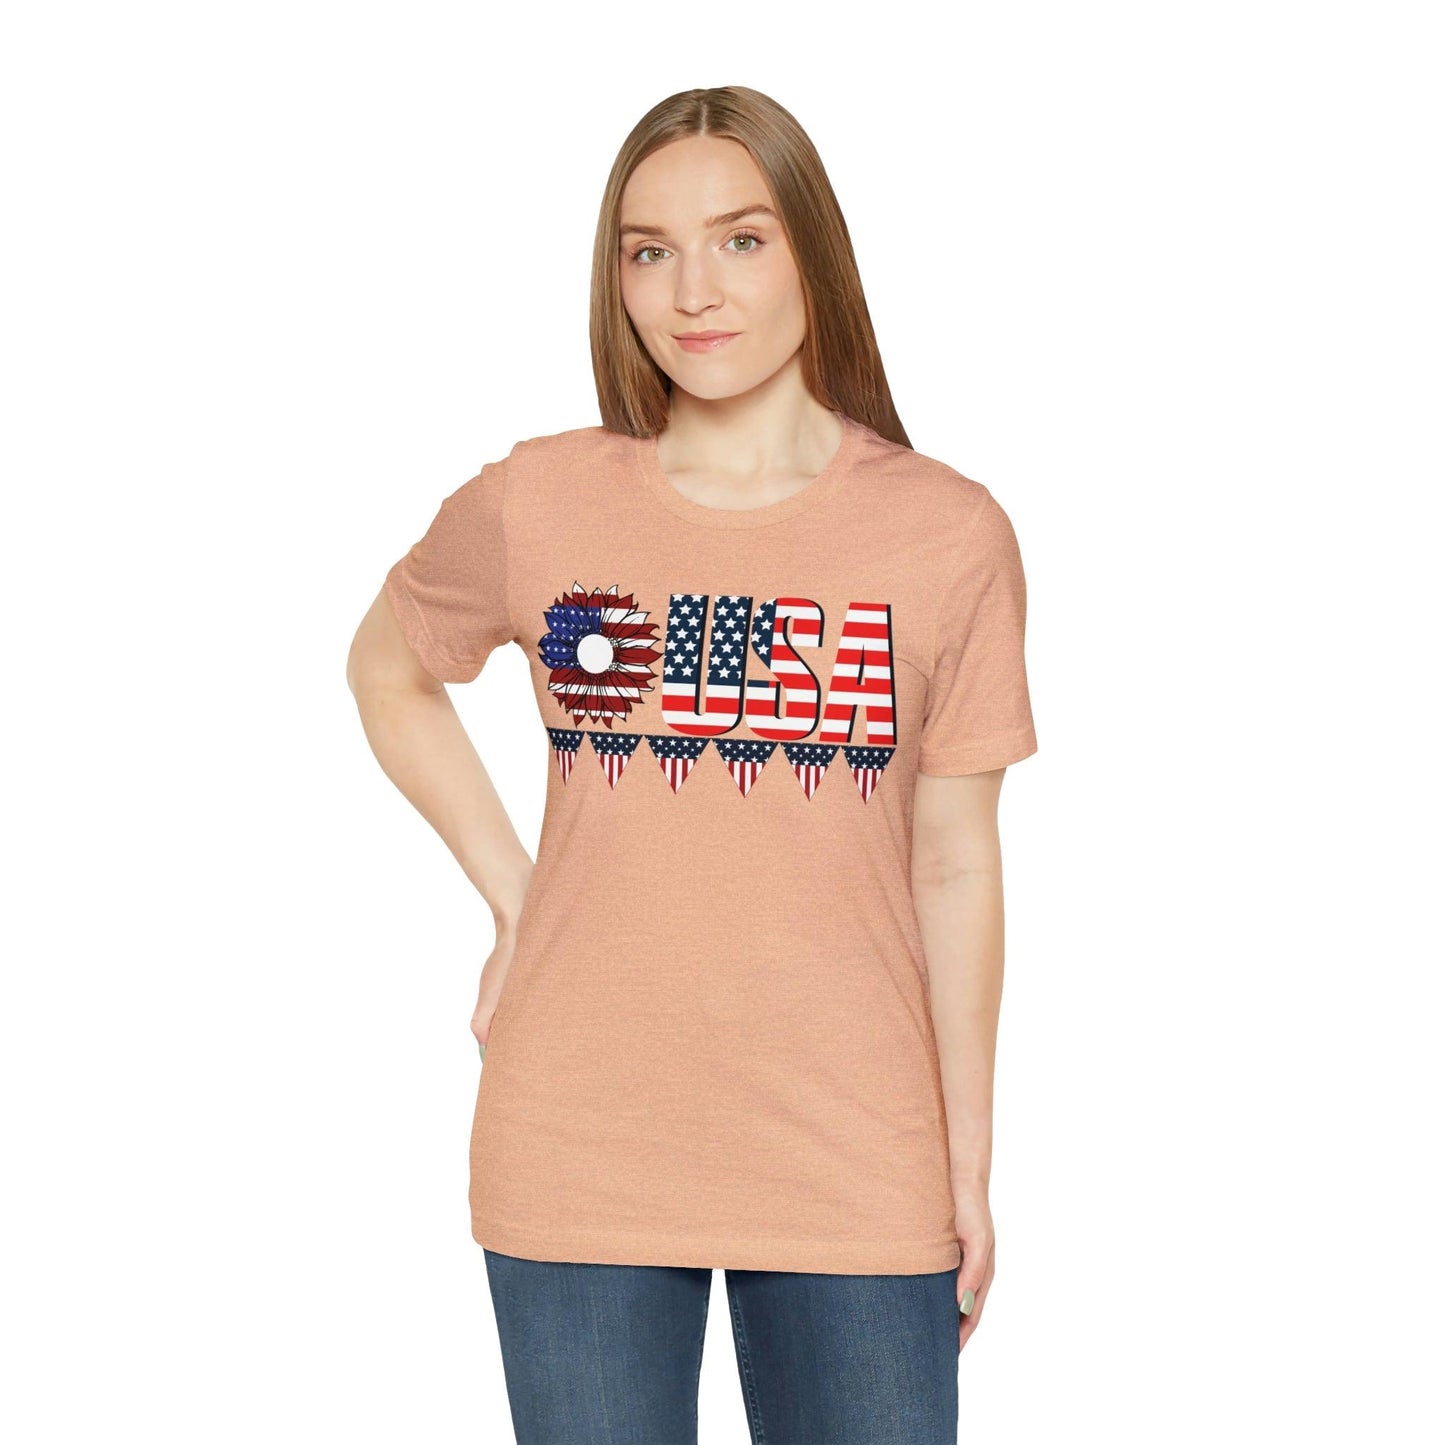 Flower USA American flag shirt, Red white and blue shirt, 4th of July shirt - Giftsmojo